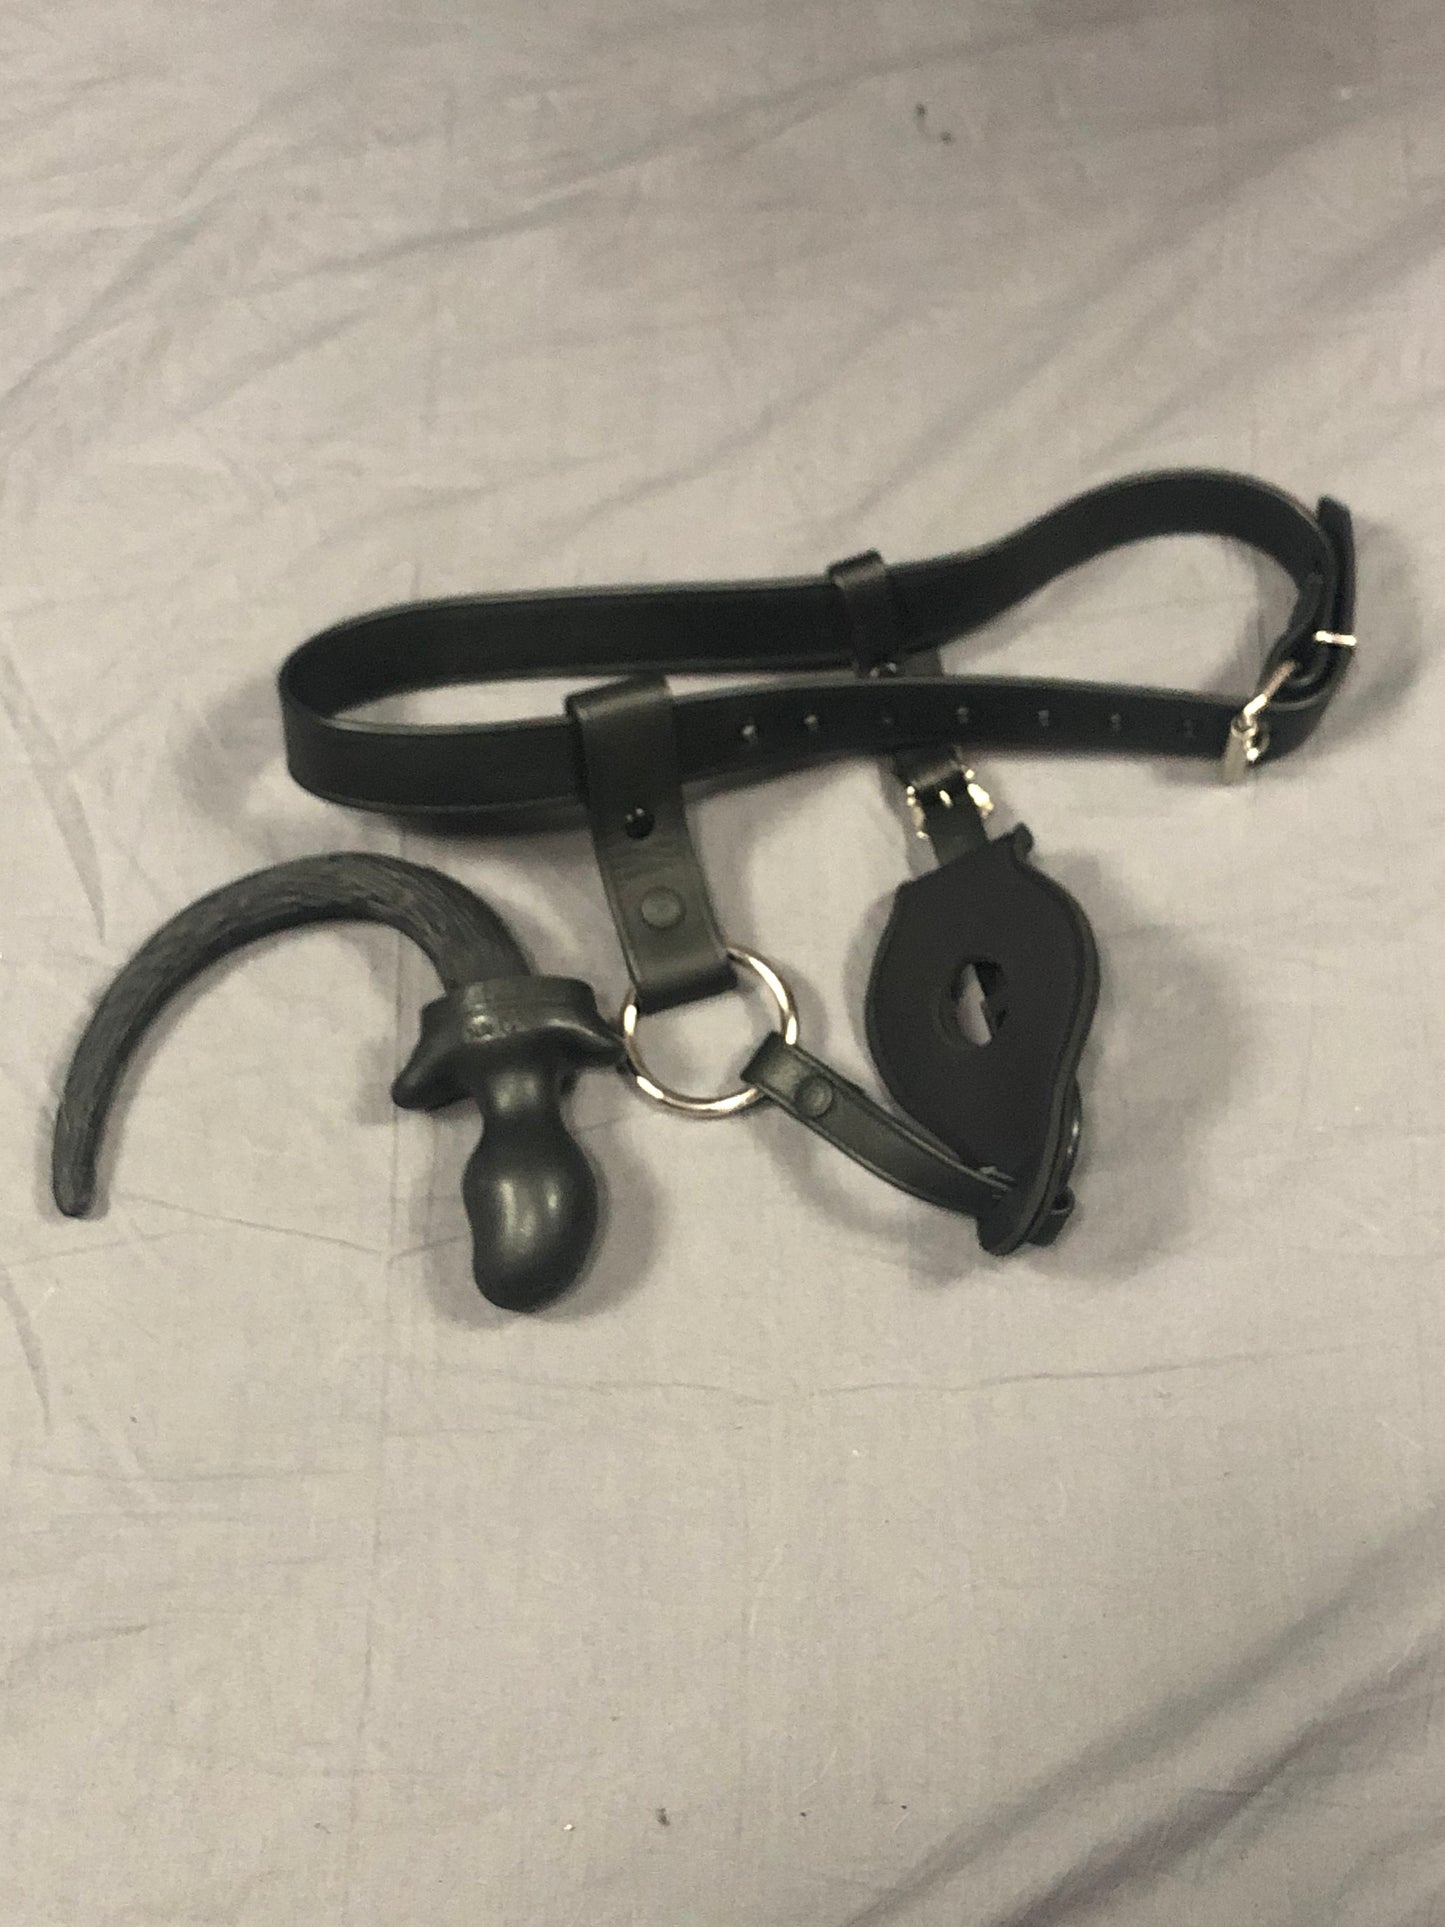 The pup tail plug, harness, and puppy tail adapter.